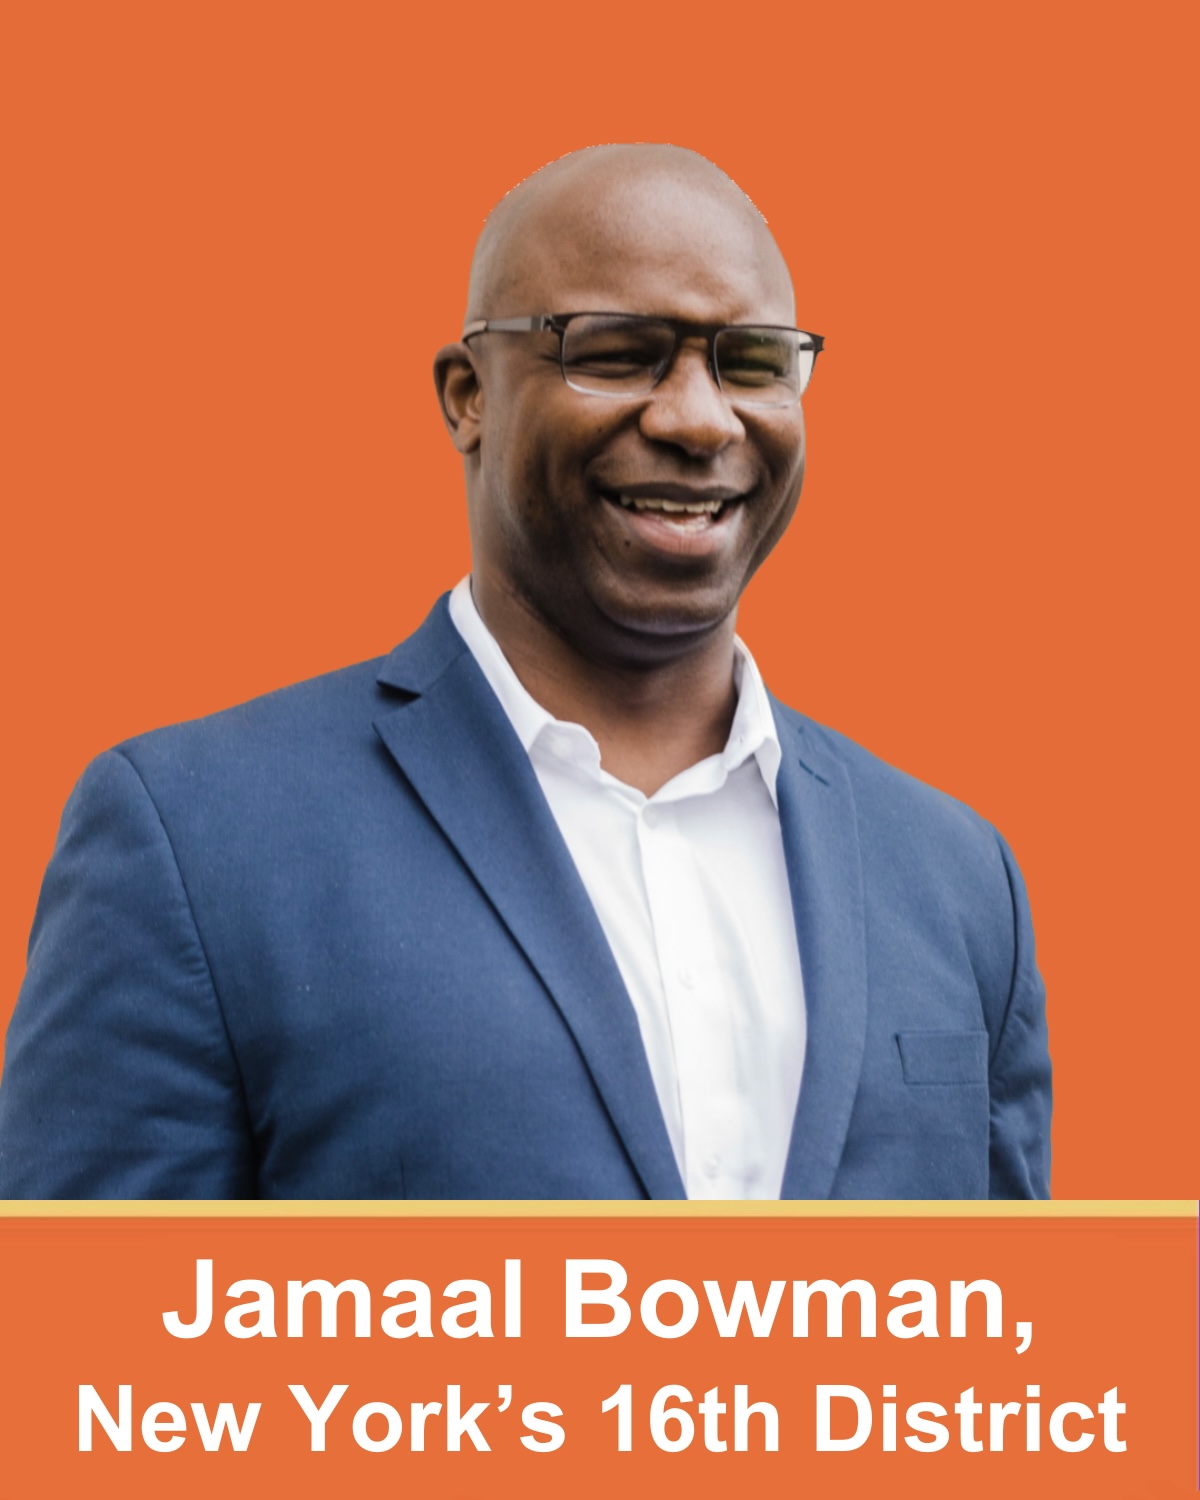 Jamaal Bowman, New York's 16th District